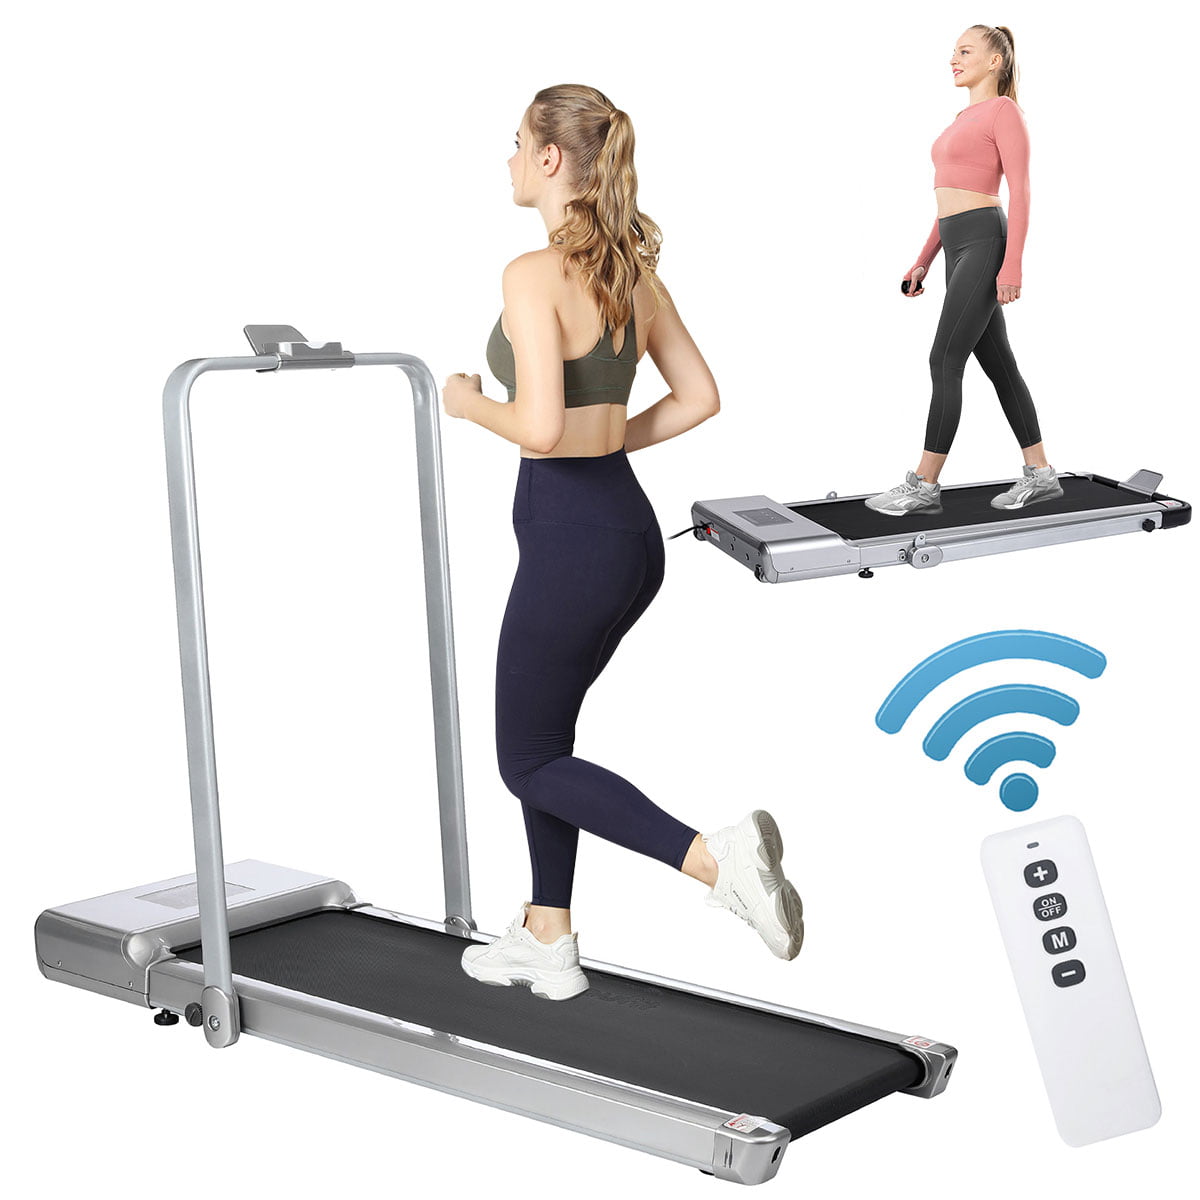 2 in 1 Under Desk Folding Treadmill,Electric Motorized Portable Pad Treadmills Walking Jogging Running Exercise Fitness Machine with Remote Controller and Bluetooth Speaker for Home Gym Office 